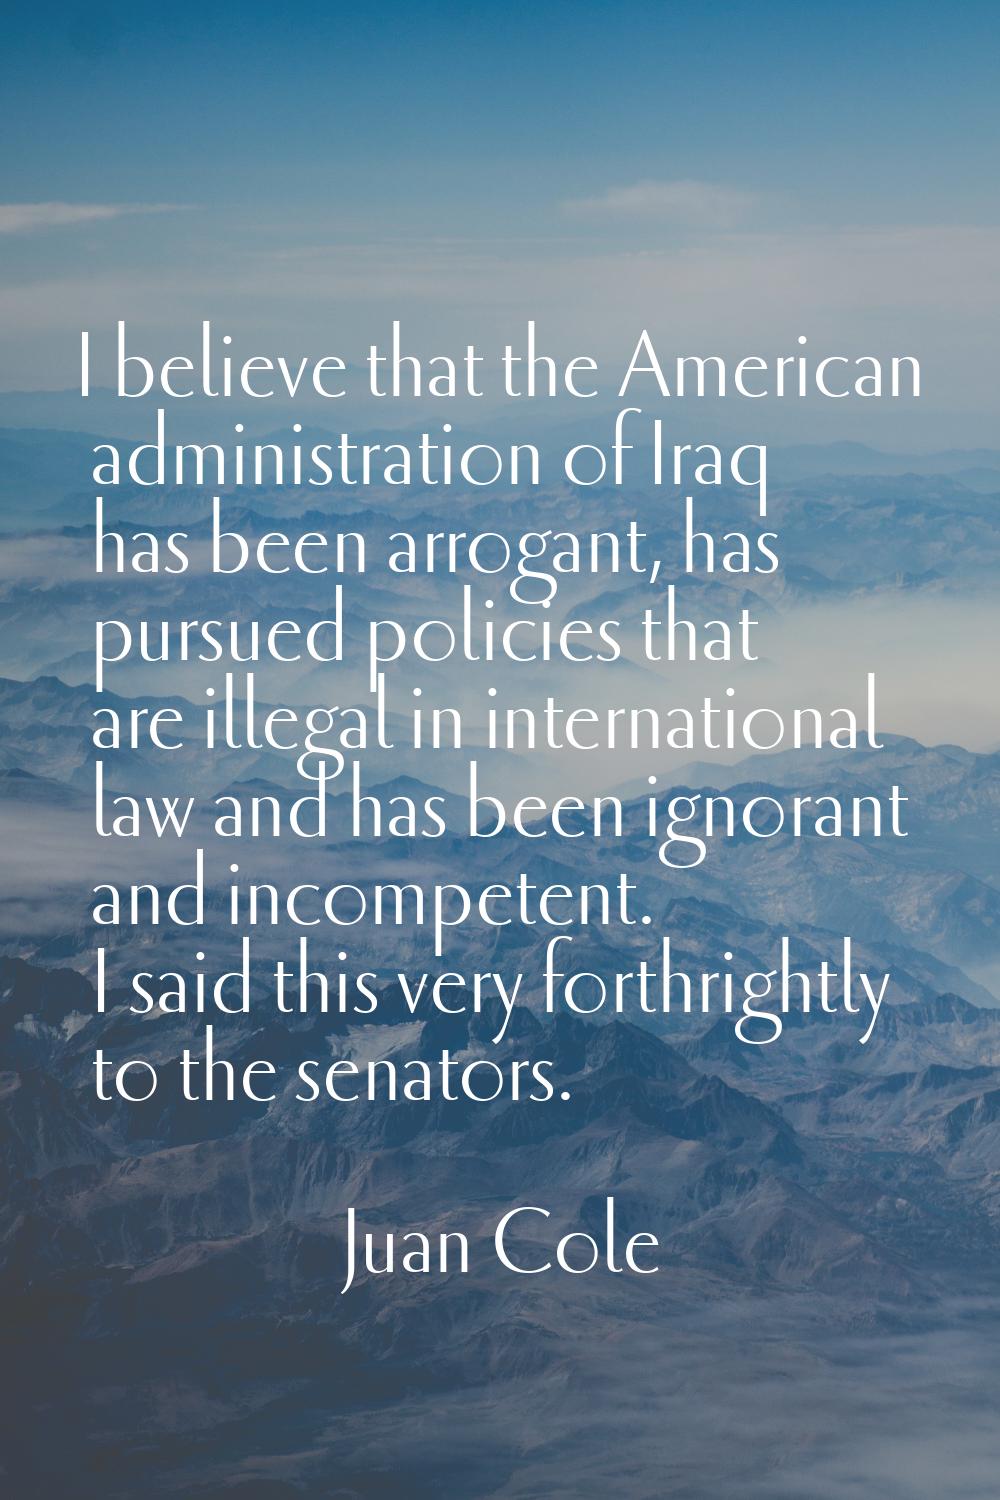 I believe that the American administration of Iraq has been arrogant, has pursued policies that are